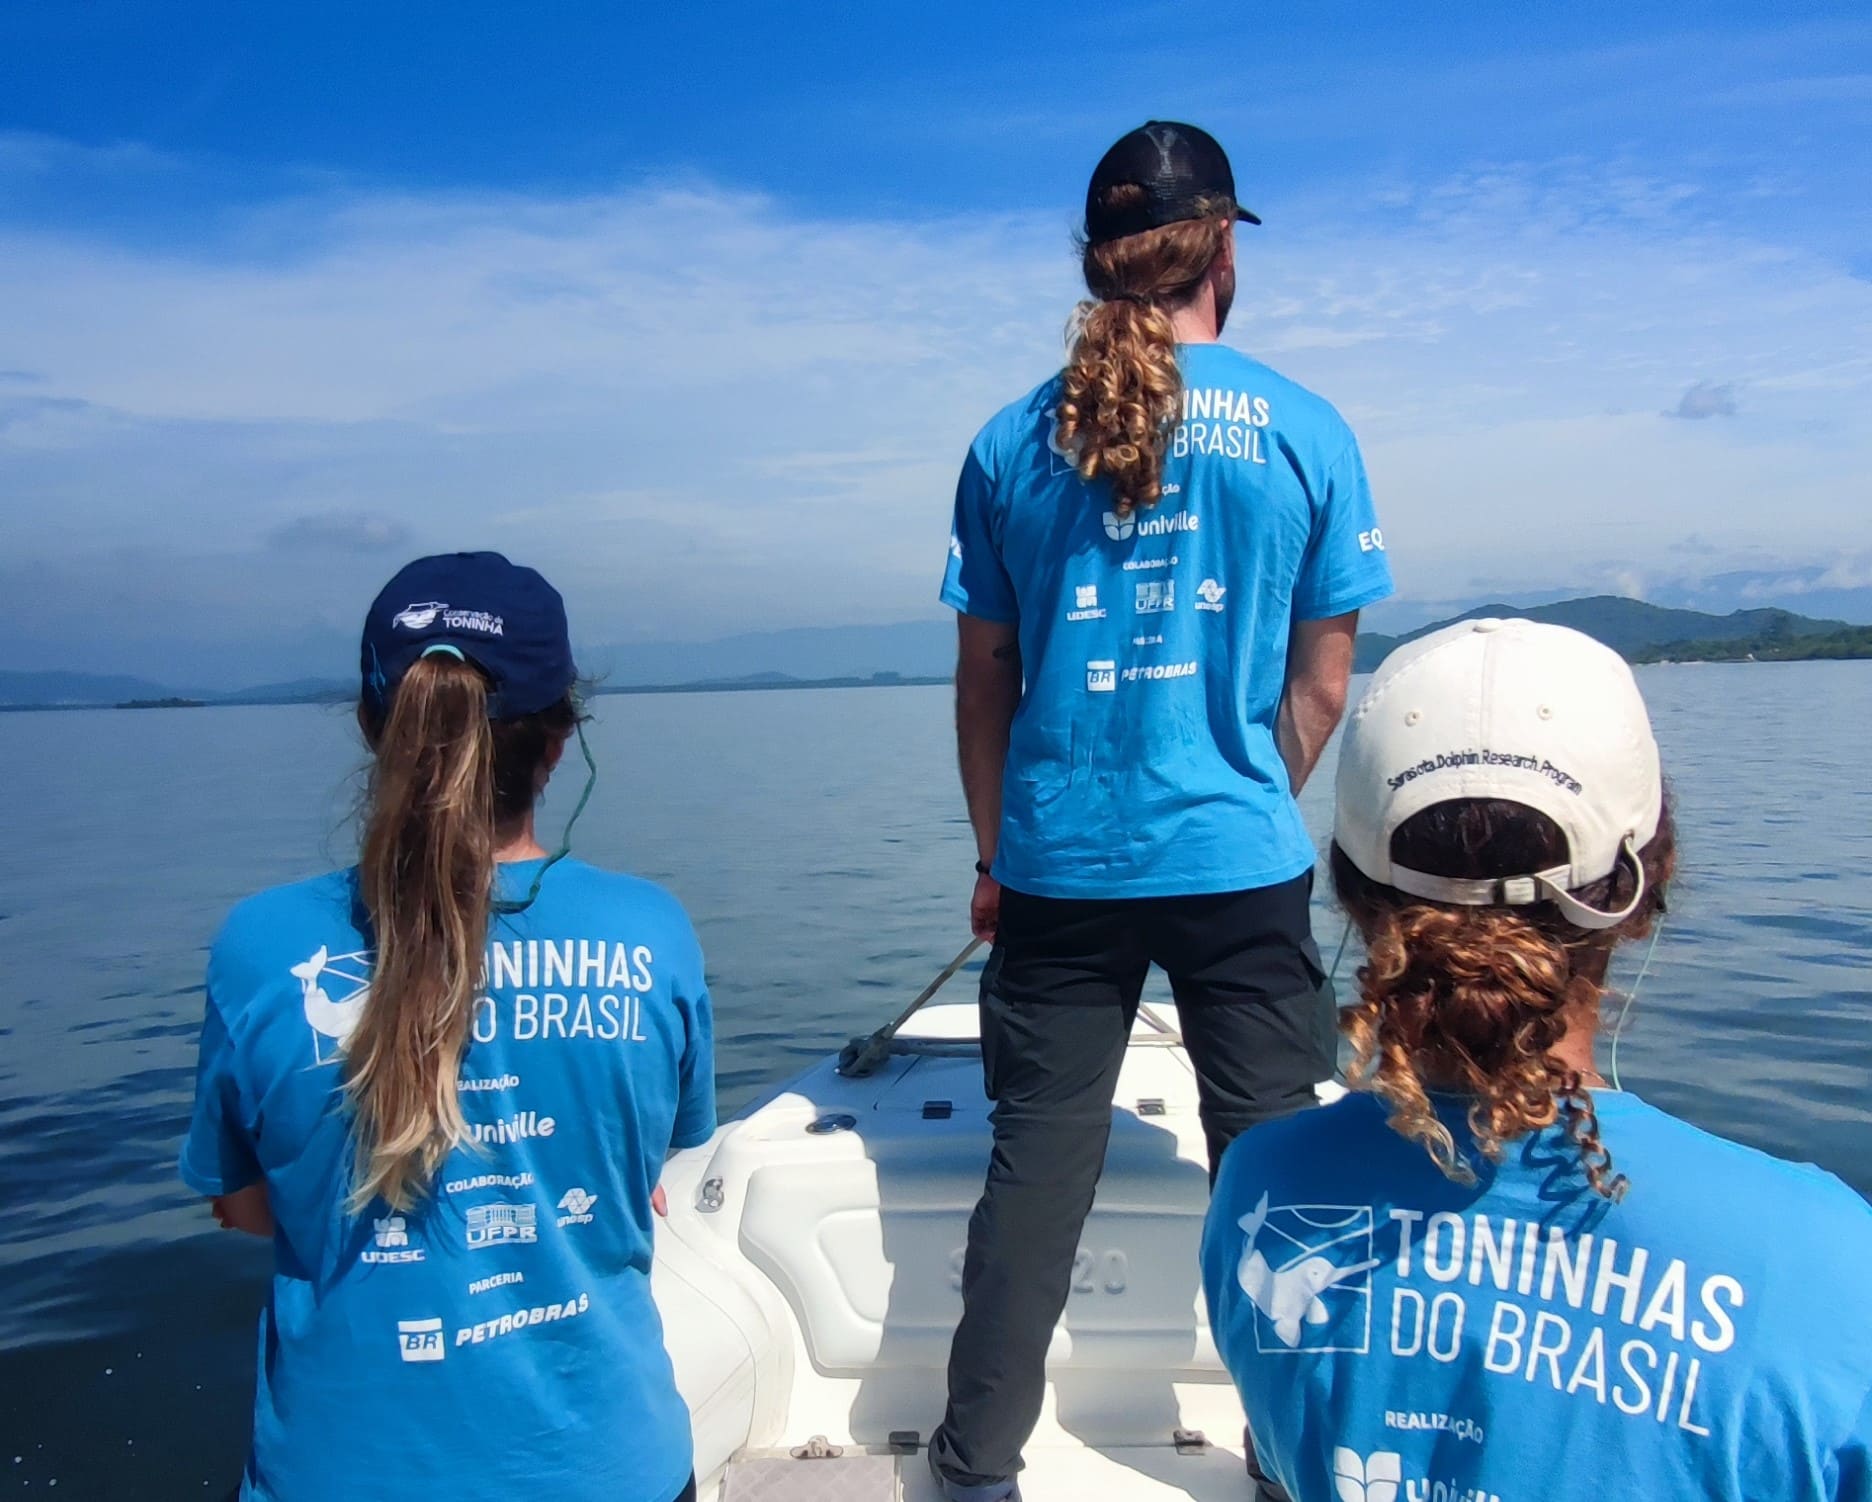 Three Toninhas do Brasil researchers aboard a vessel during the visual monitoring of porpoises in Babitonga Bay.